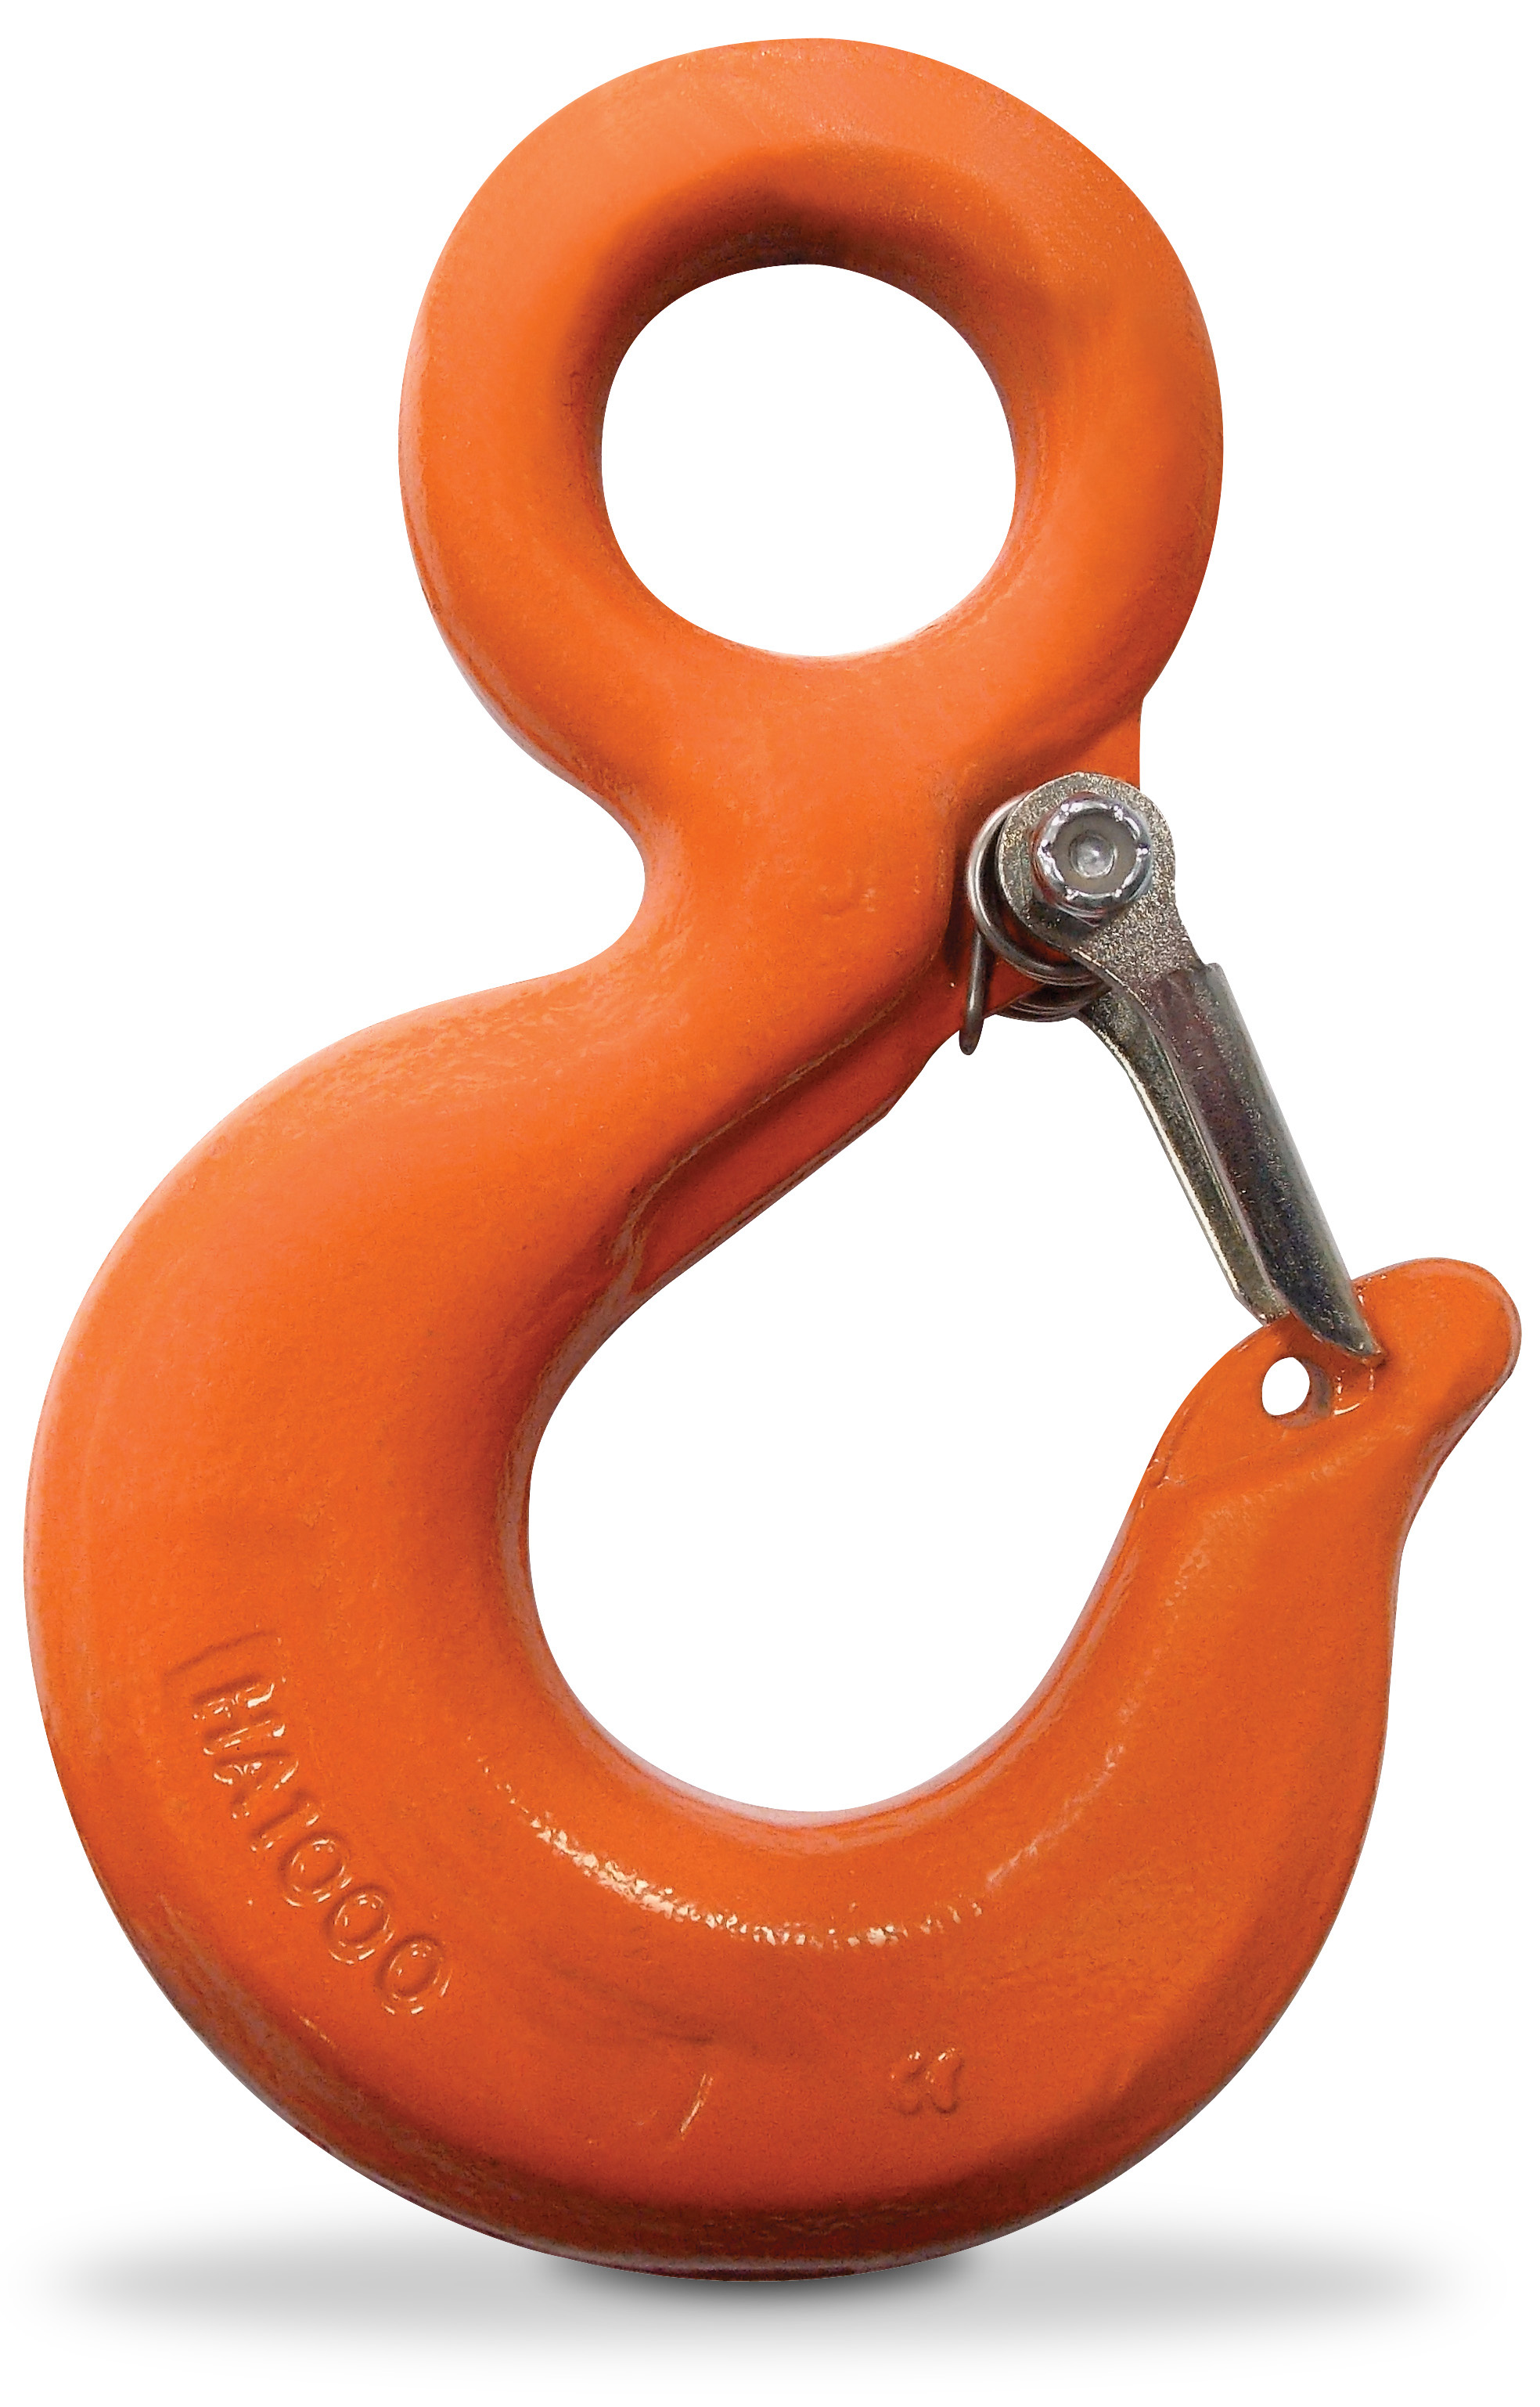 1/2 CM 667050-2 Hammerlok Dual Rated for Use with HA800 or HA1000 15,000 lb Work Load Limit 